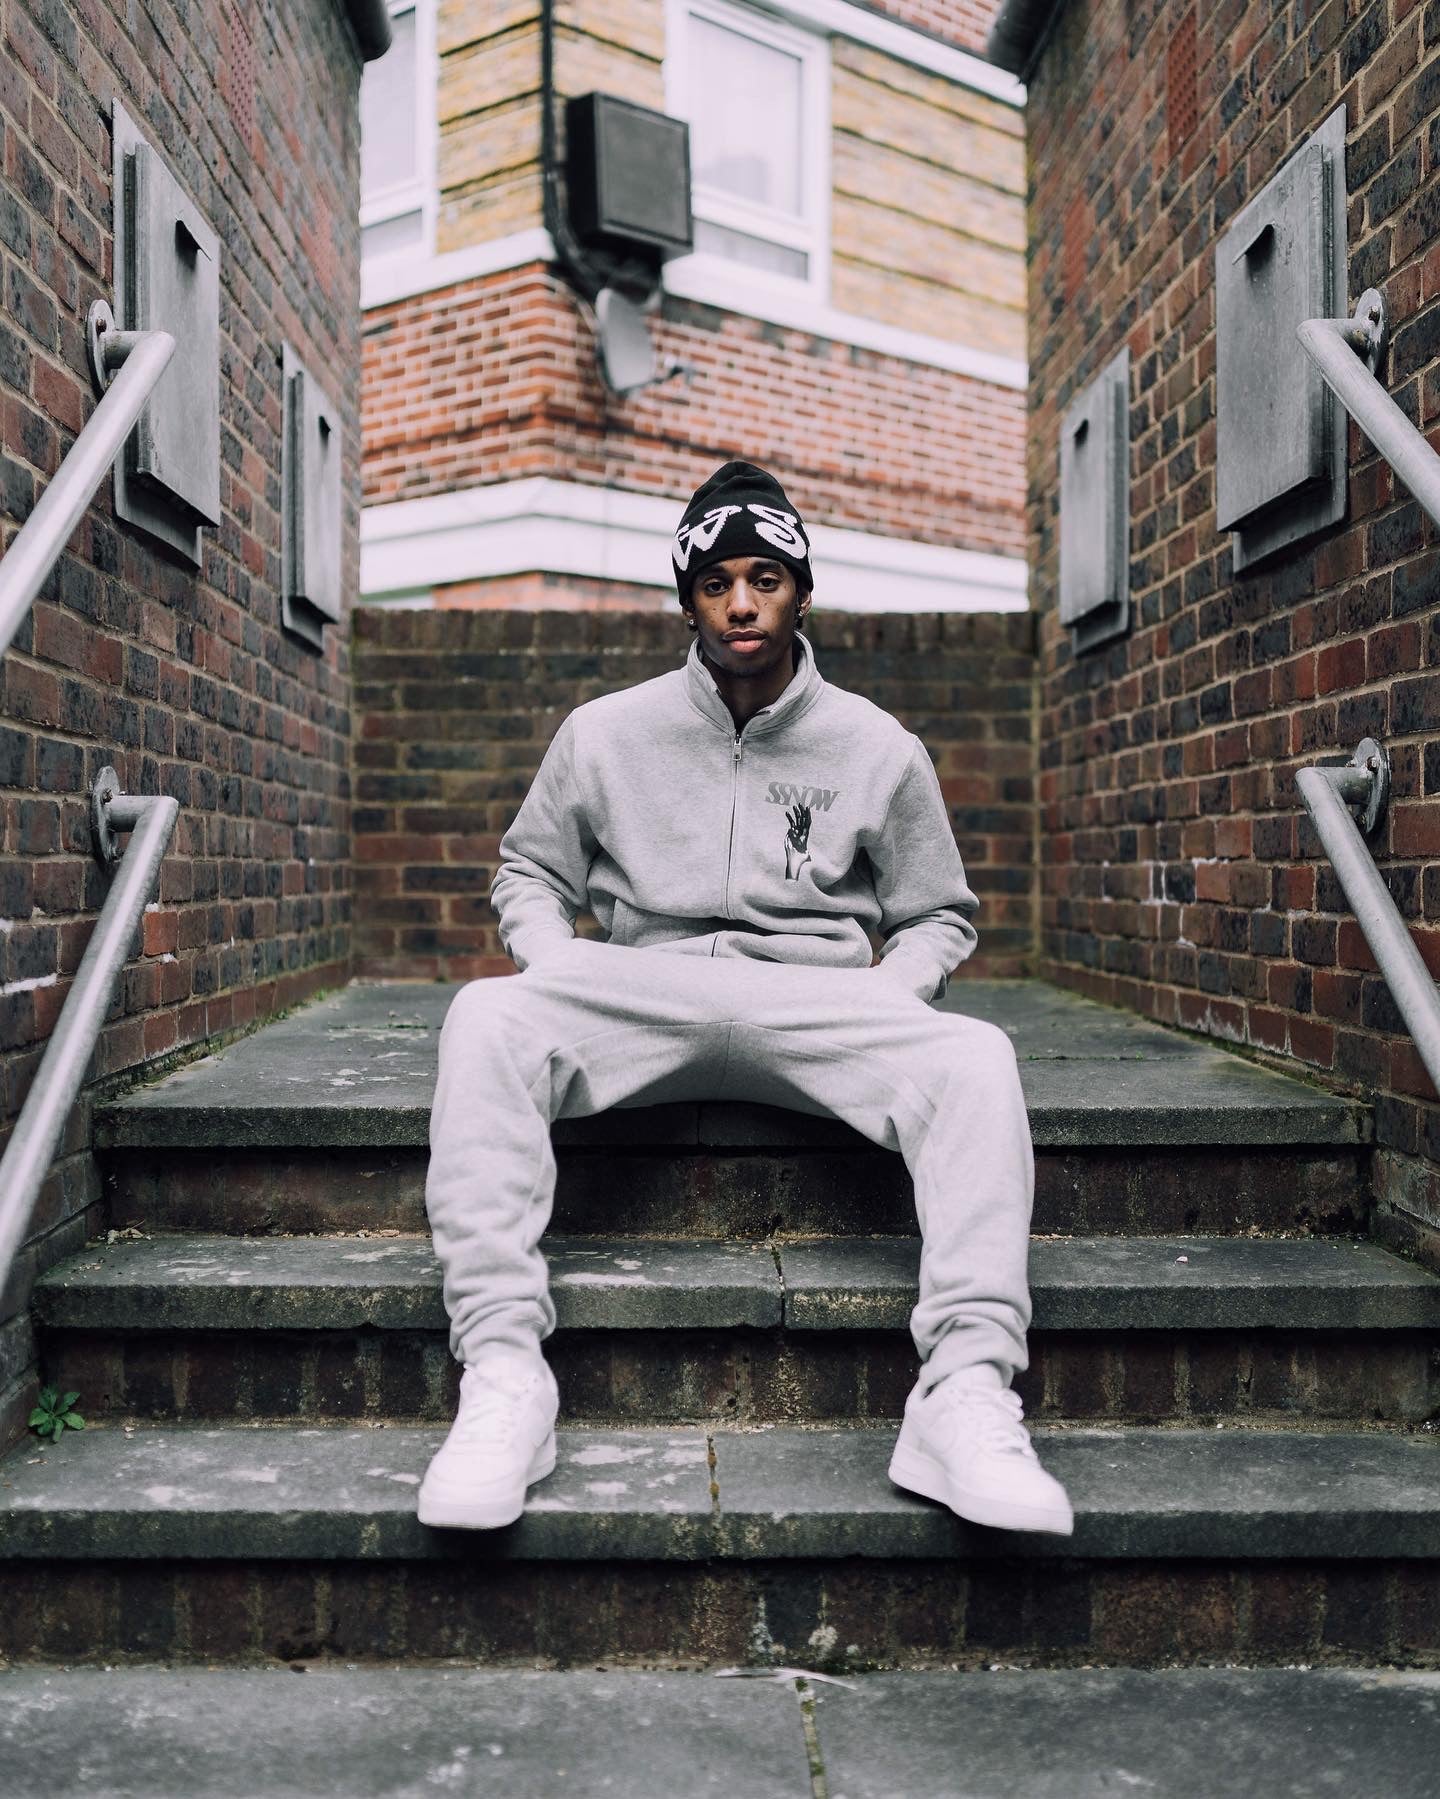 OXFORD GREY Reflective Tracksuit Bottoms - SSNOW